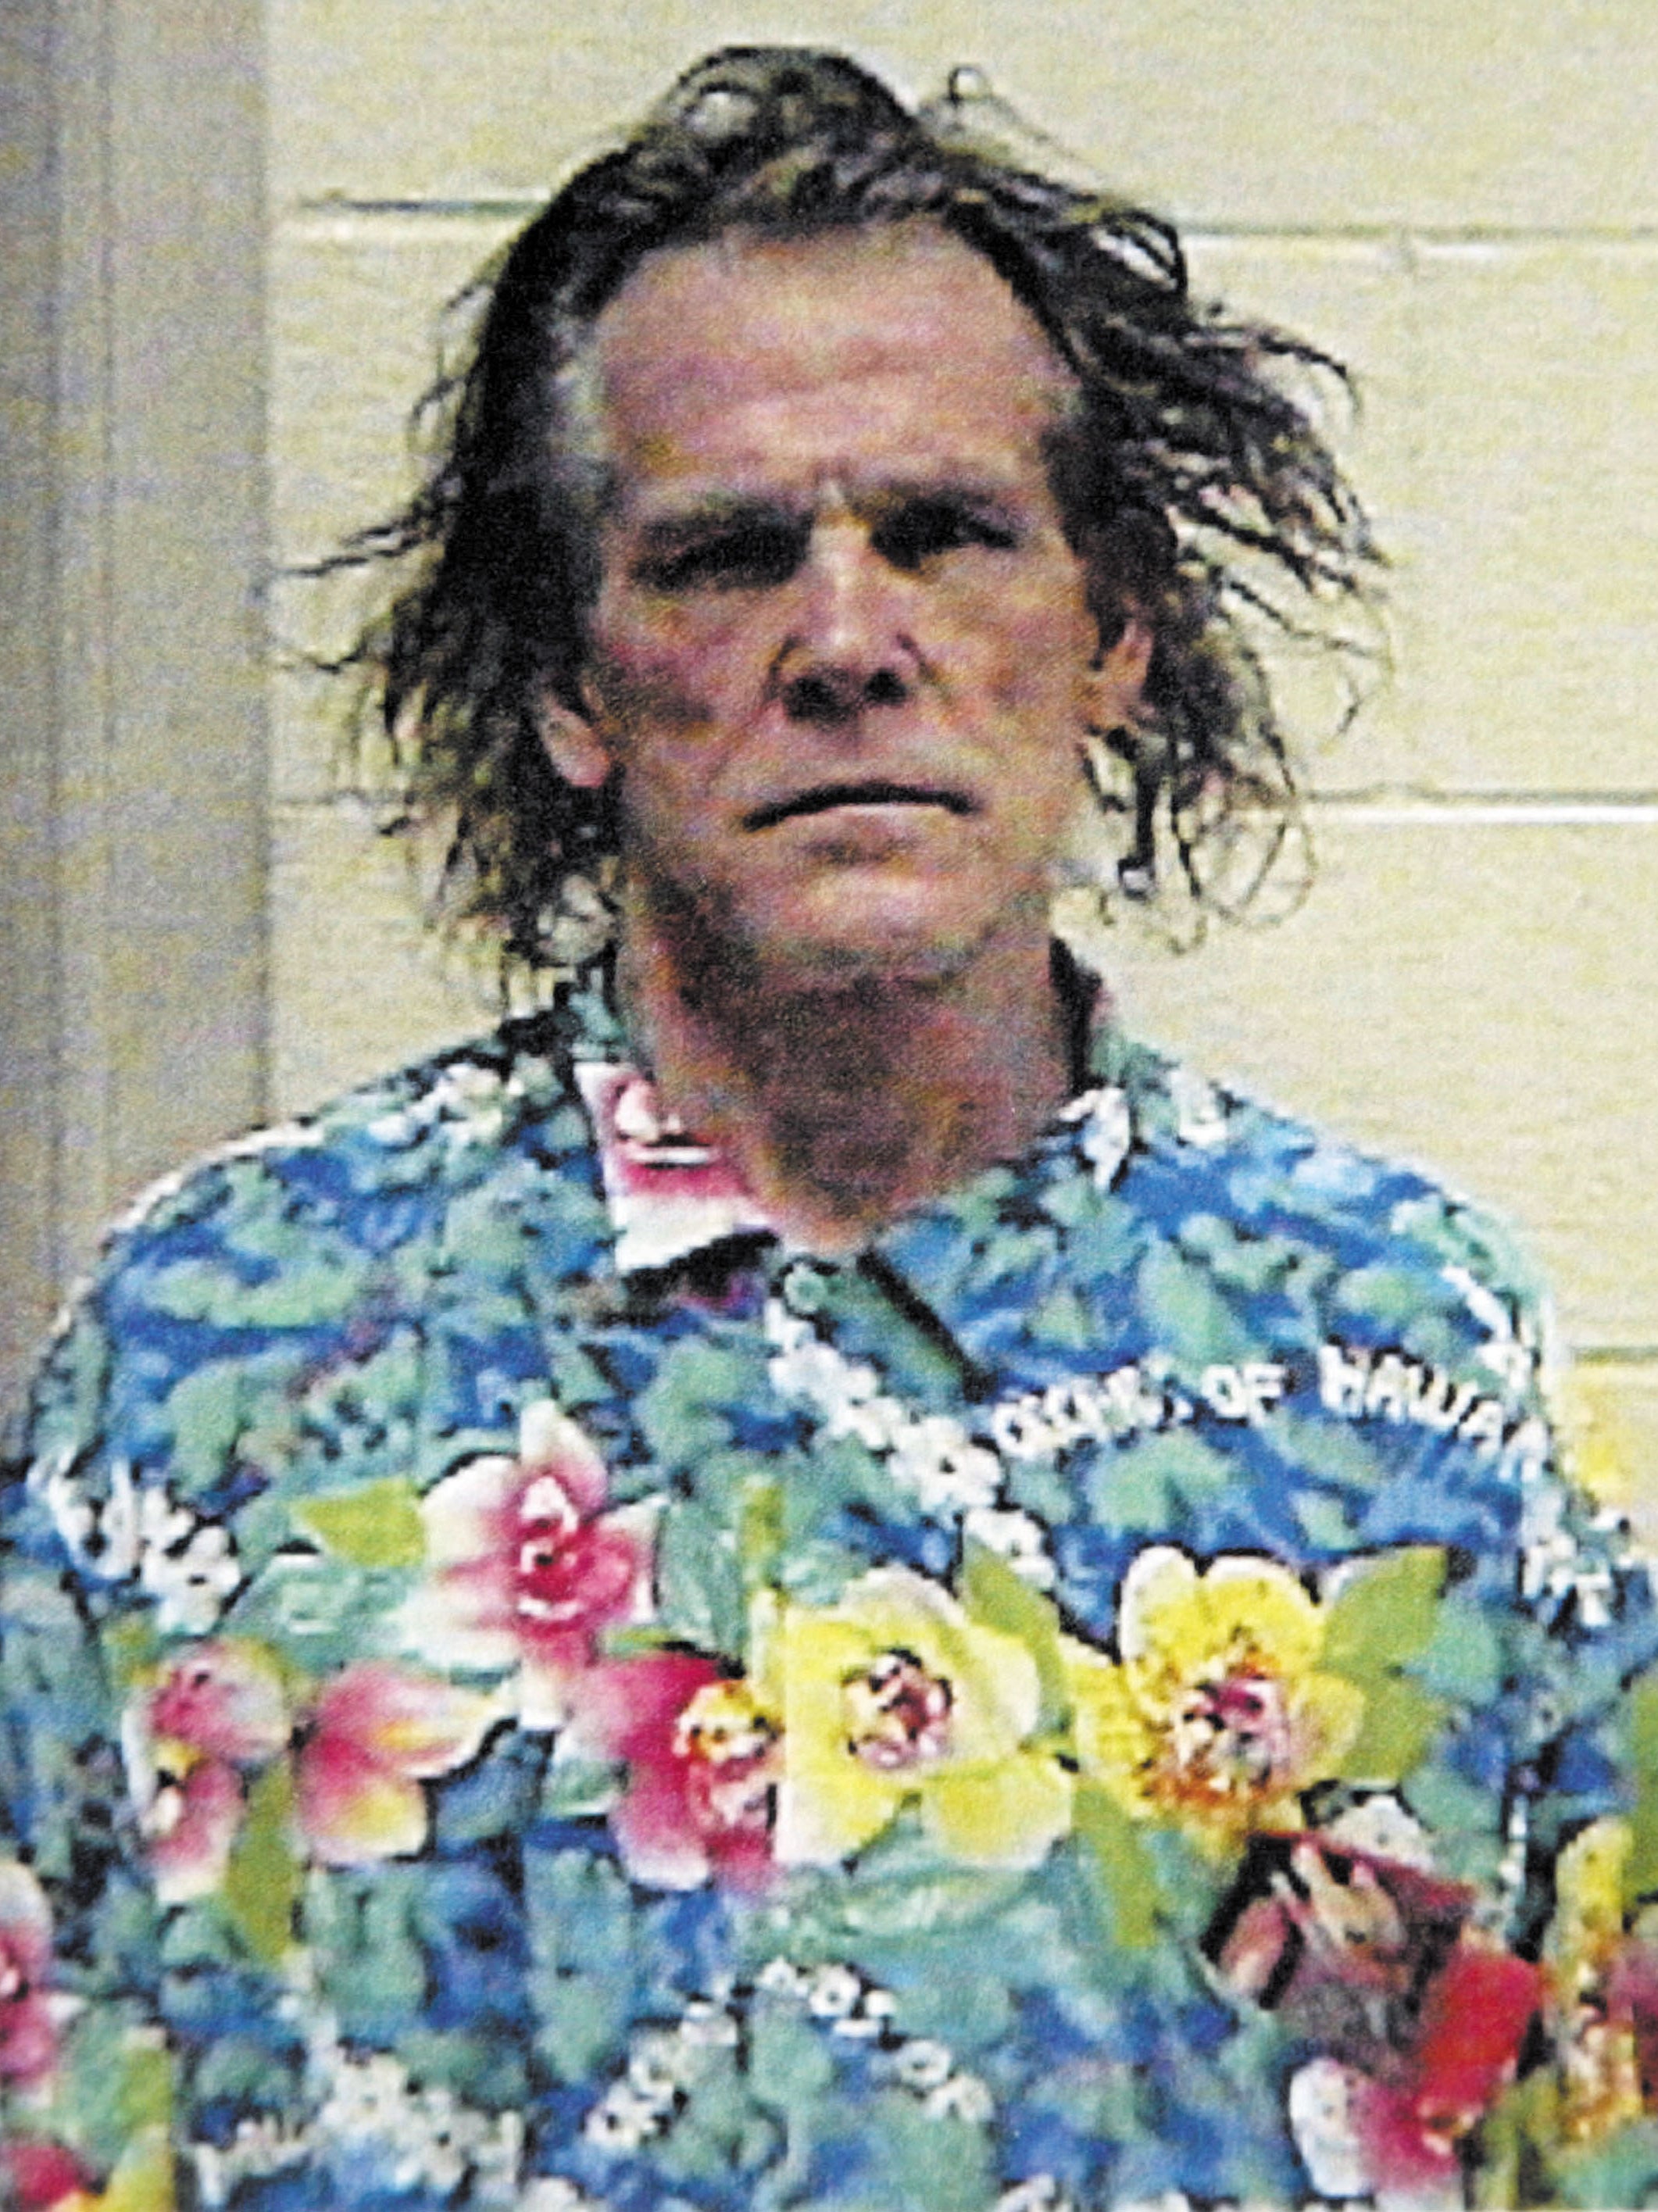 Nick Nolte was arrested in California and charged with driving under the influence in September 2002, wearing a memorable outfit at the time of his arrest